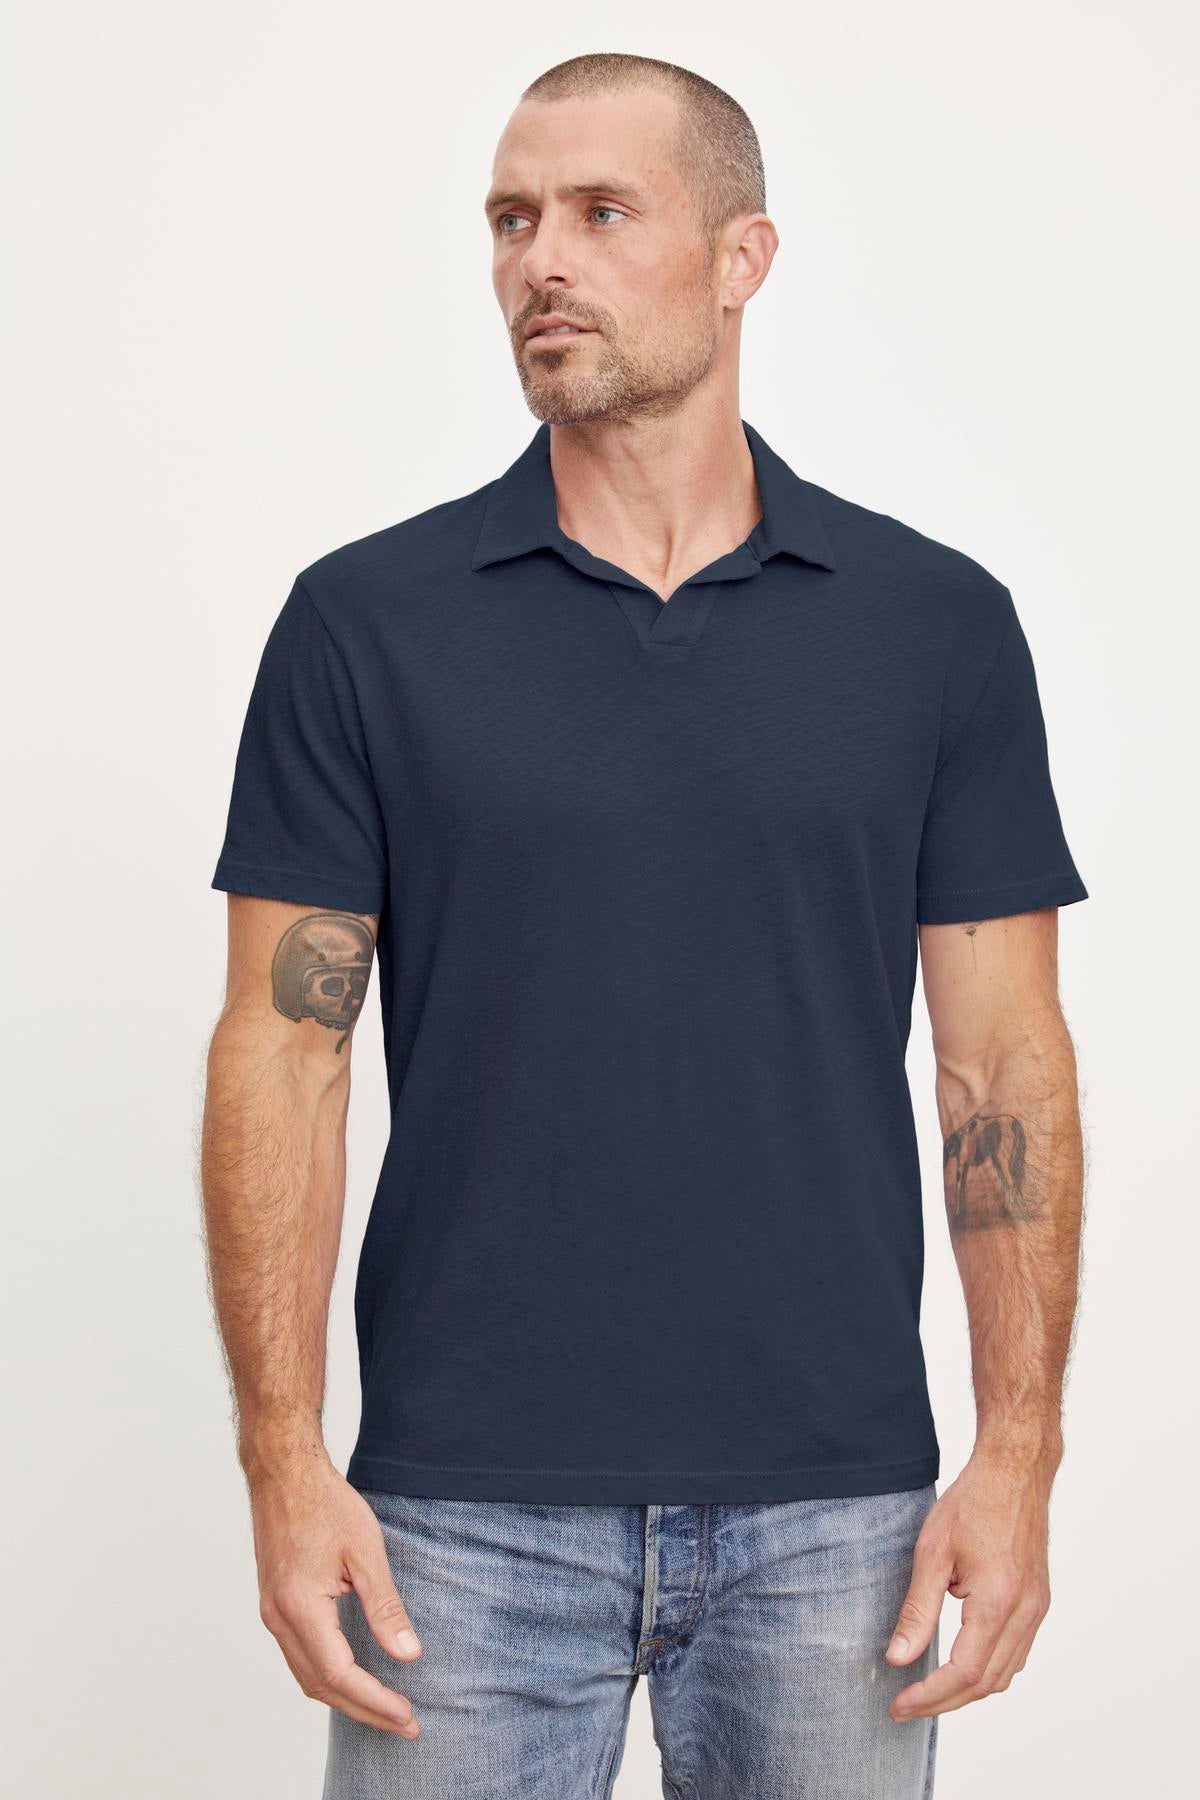 A man in a navy Velvet by Graham & Spencer BECK Polo shirt and jeans stands facing forward, with visible tattoos on both forearms.-36890691797185